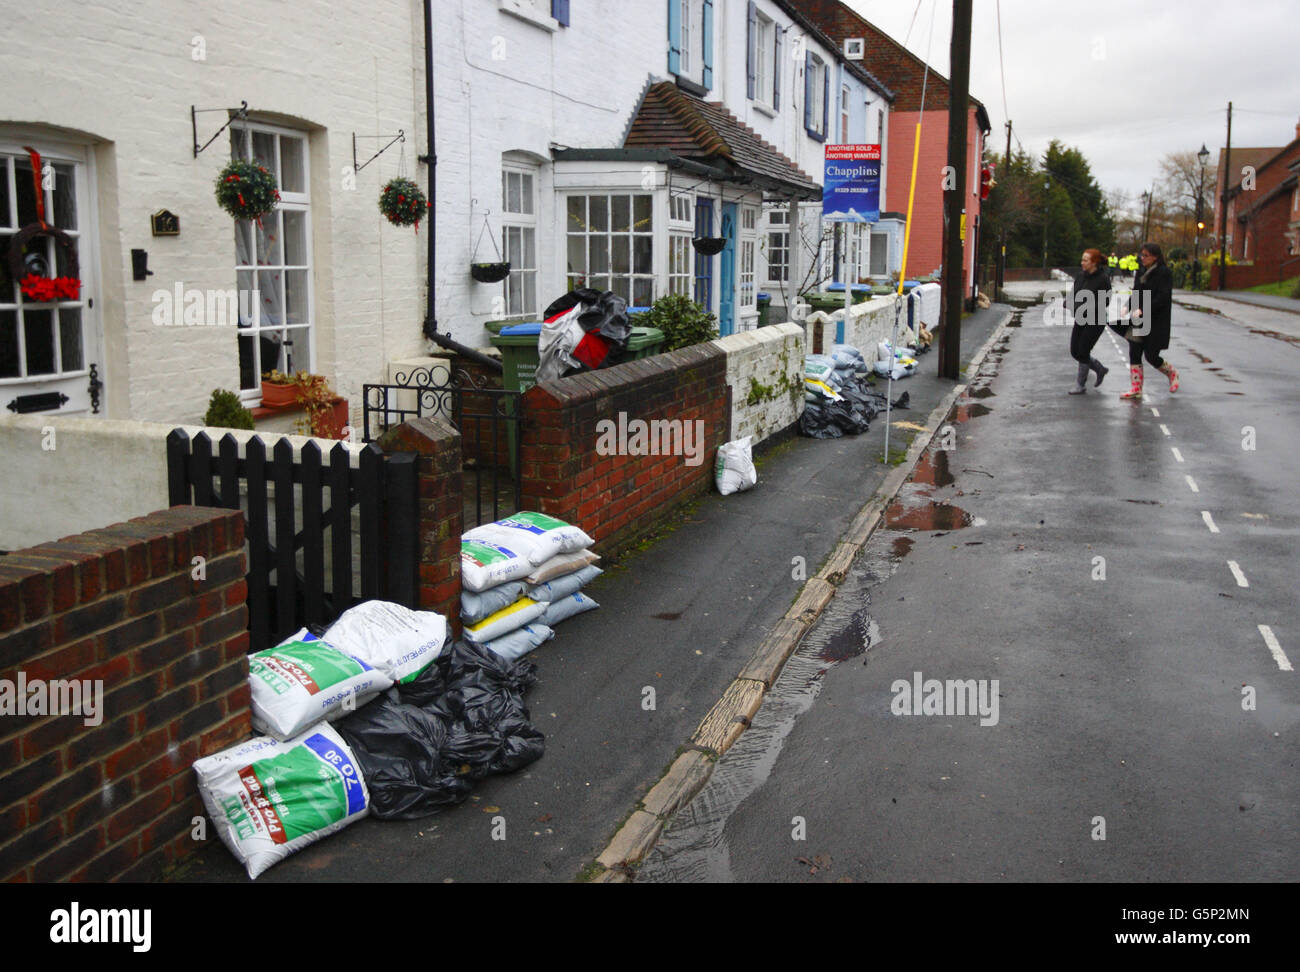 Sandbagged homes in Wallington, Hampshire where residents have been told to leave their homes as the Environment Agency believes the River Wallington may burst its banks. Stock Photo